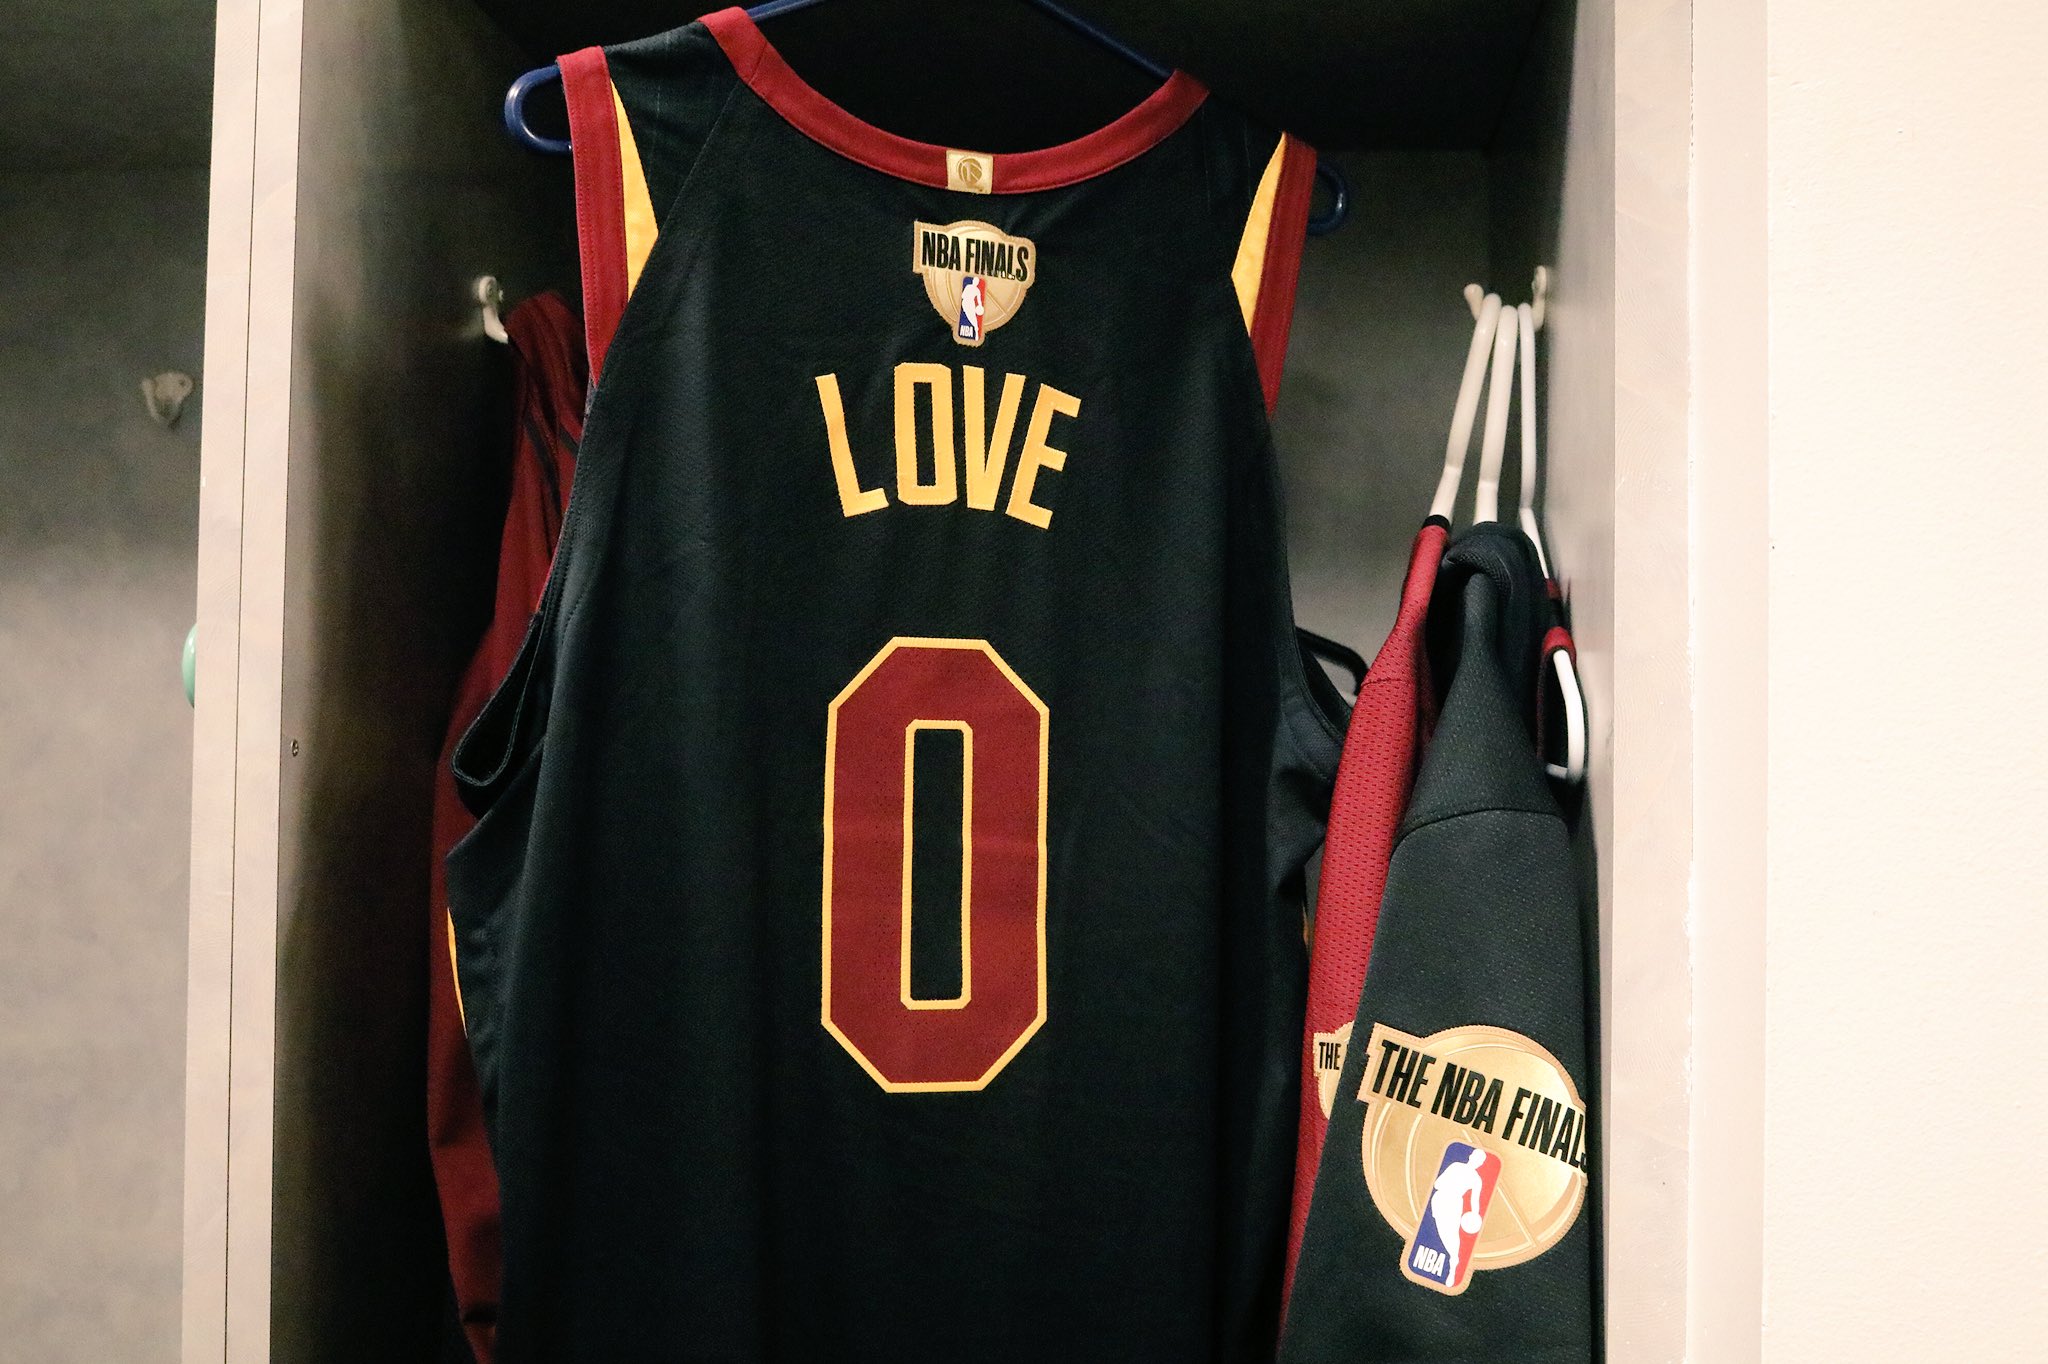 Cleveland Cavaliers on X: Game 1 threads. We're back, in black